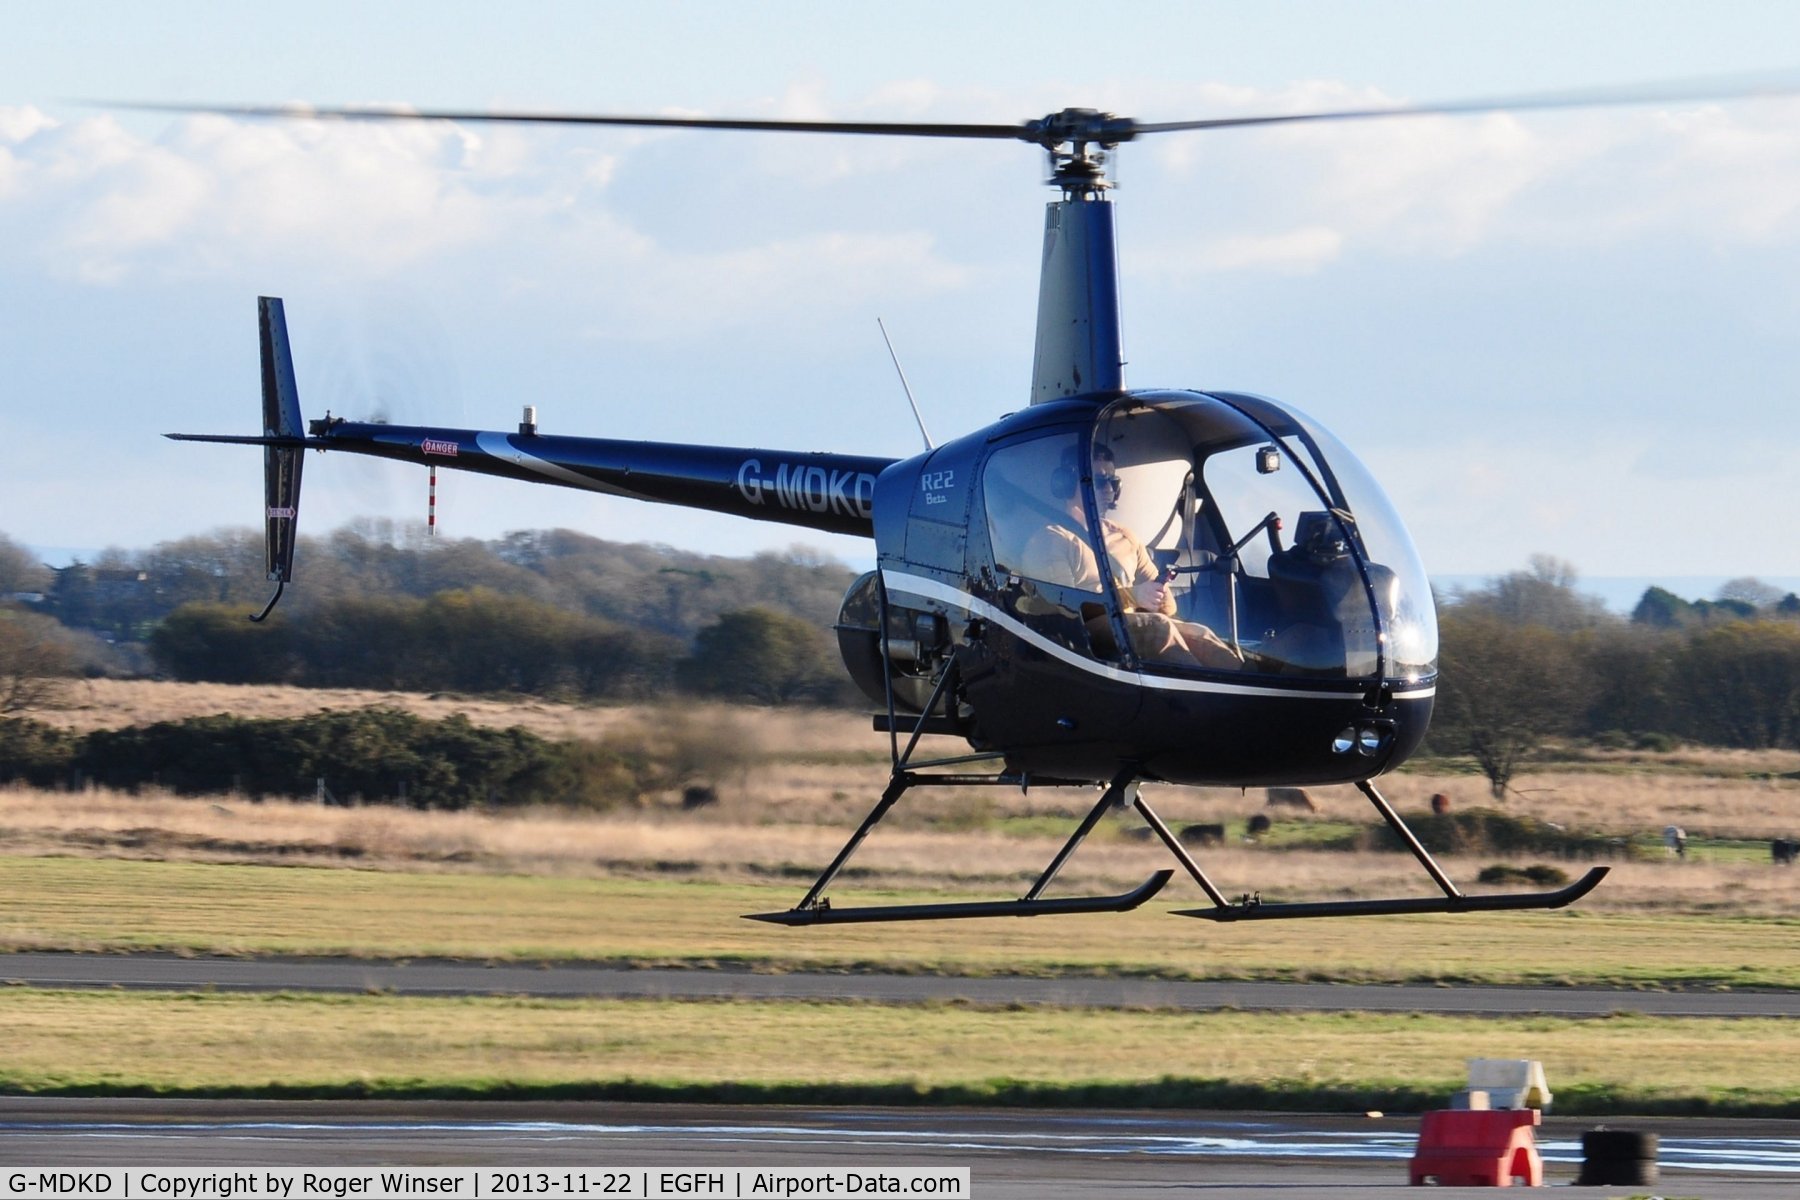 G-MDKD, 1990 Robinson R22 Beta C/N 1247, Resident R-22 Beta helicopter operated by Heli-air Wales..